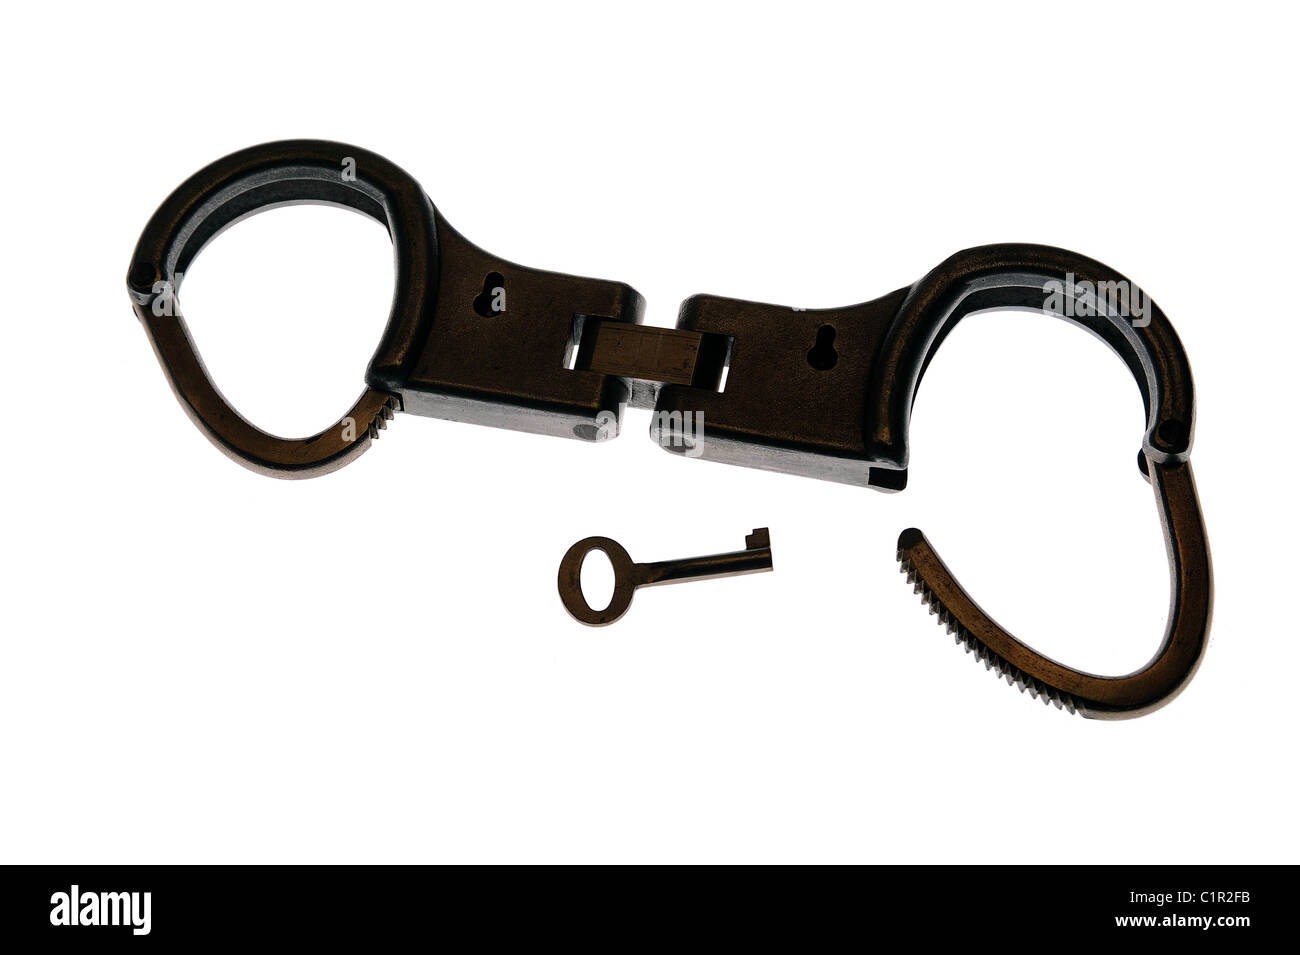 Handcuffs silhouetted against a plain background Stock Photo